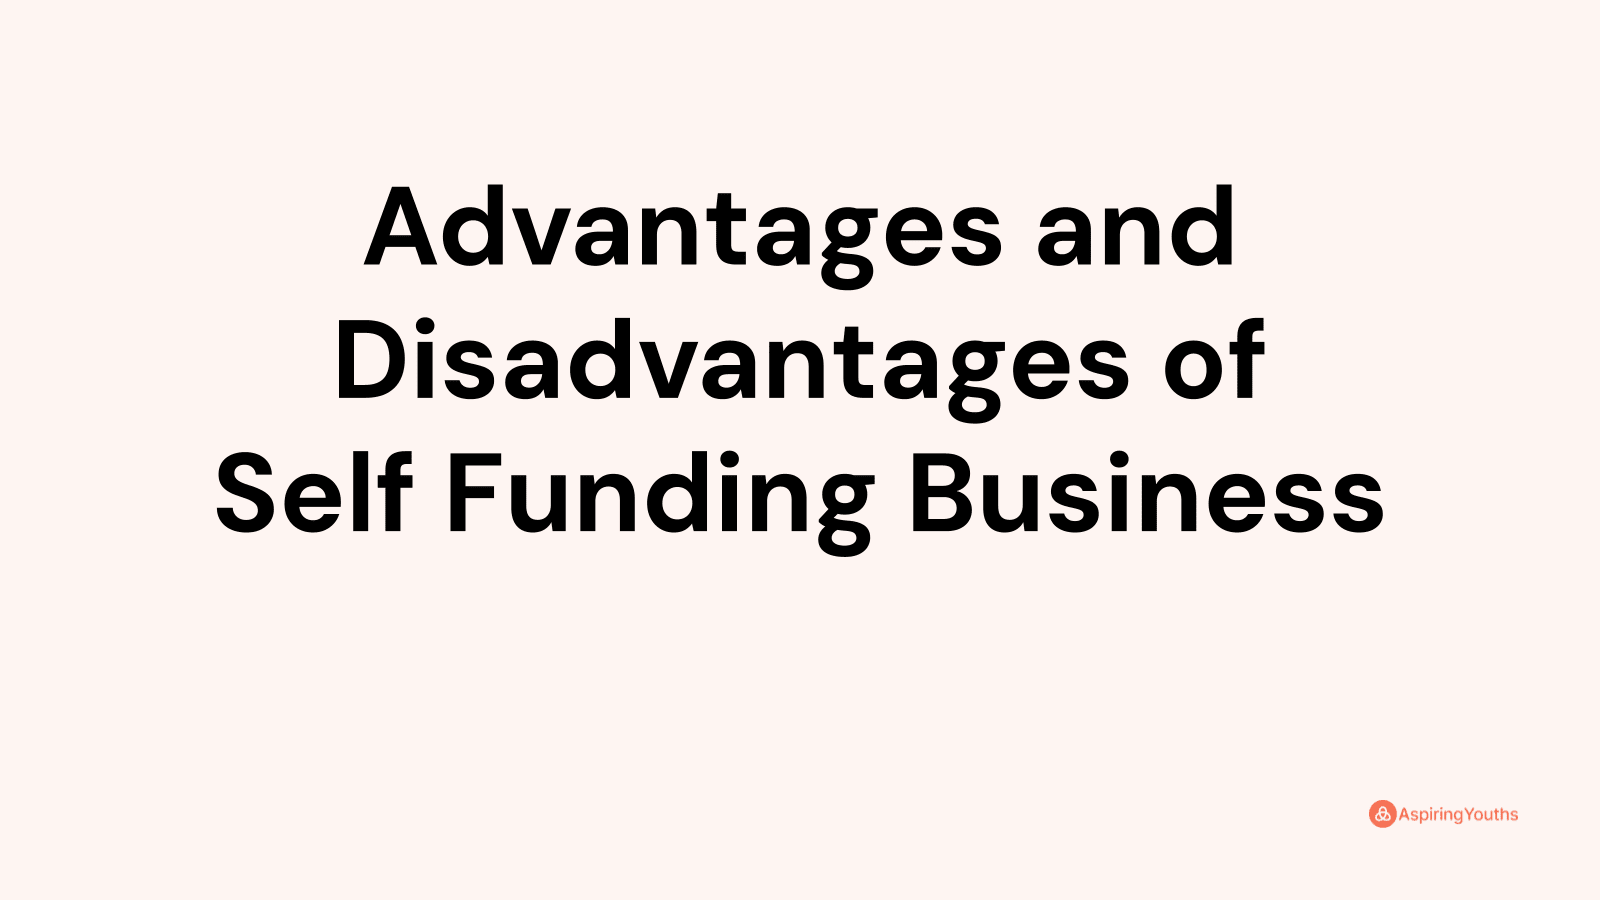 Advantages and disadvantages of Self Funding Business